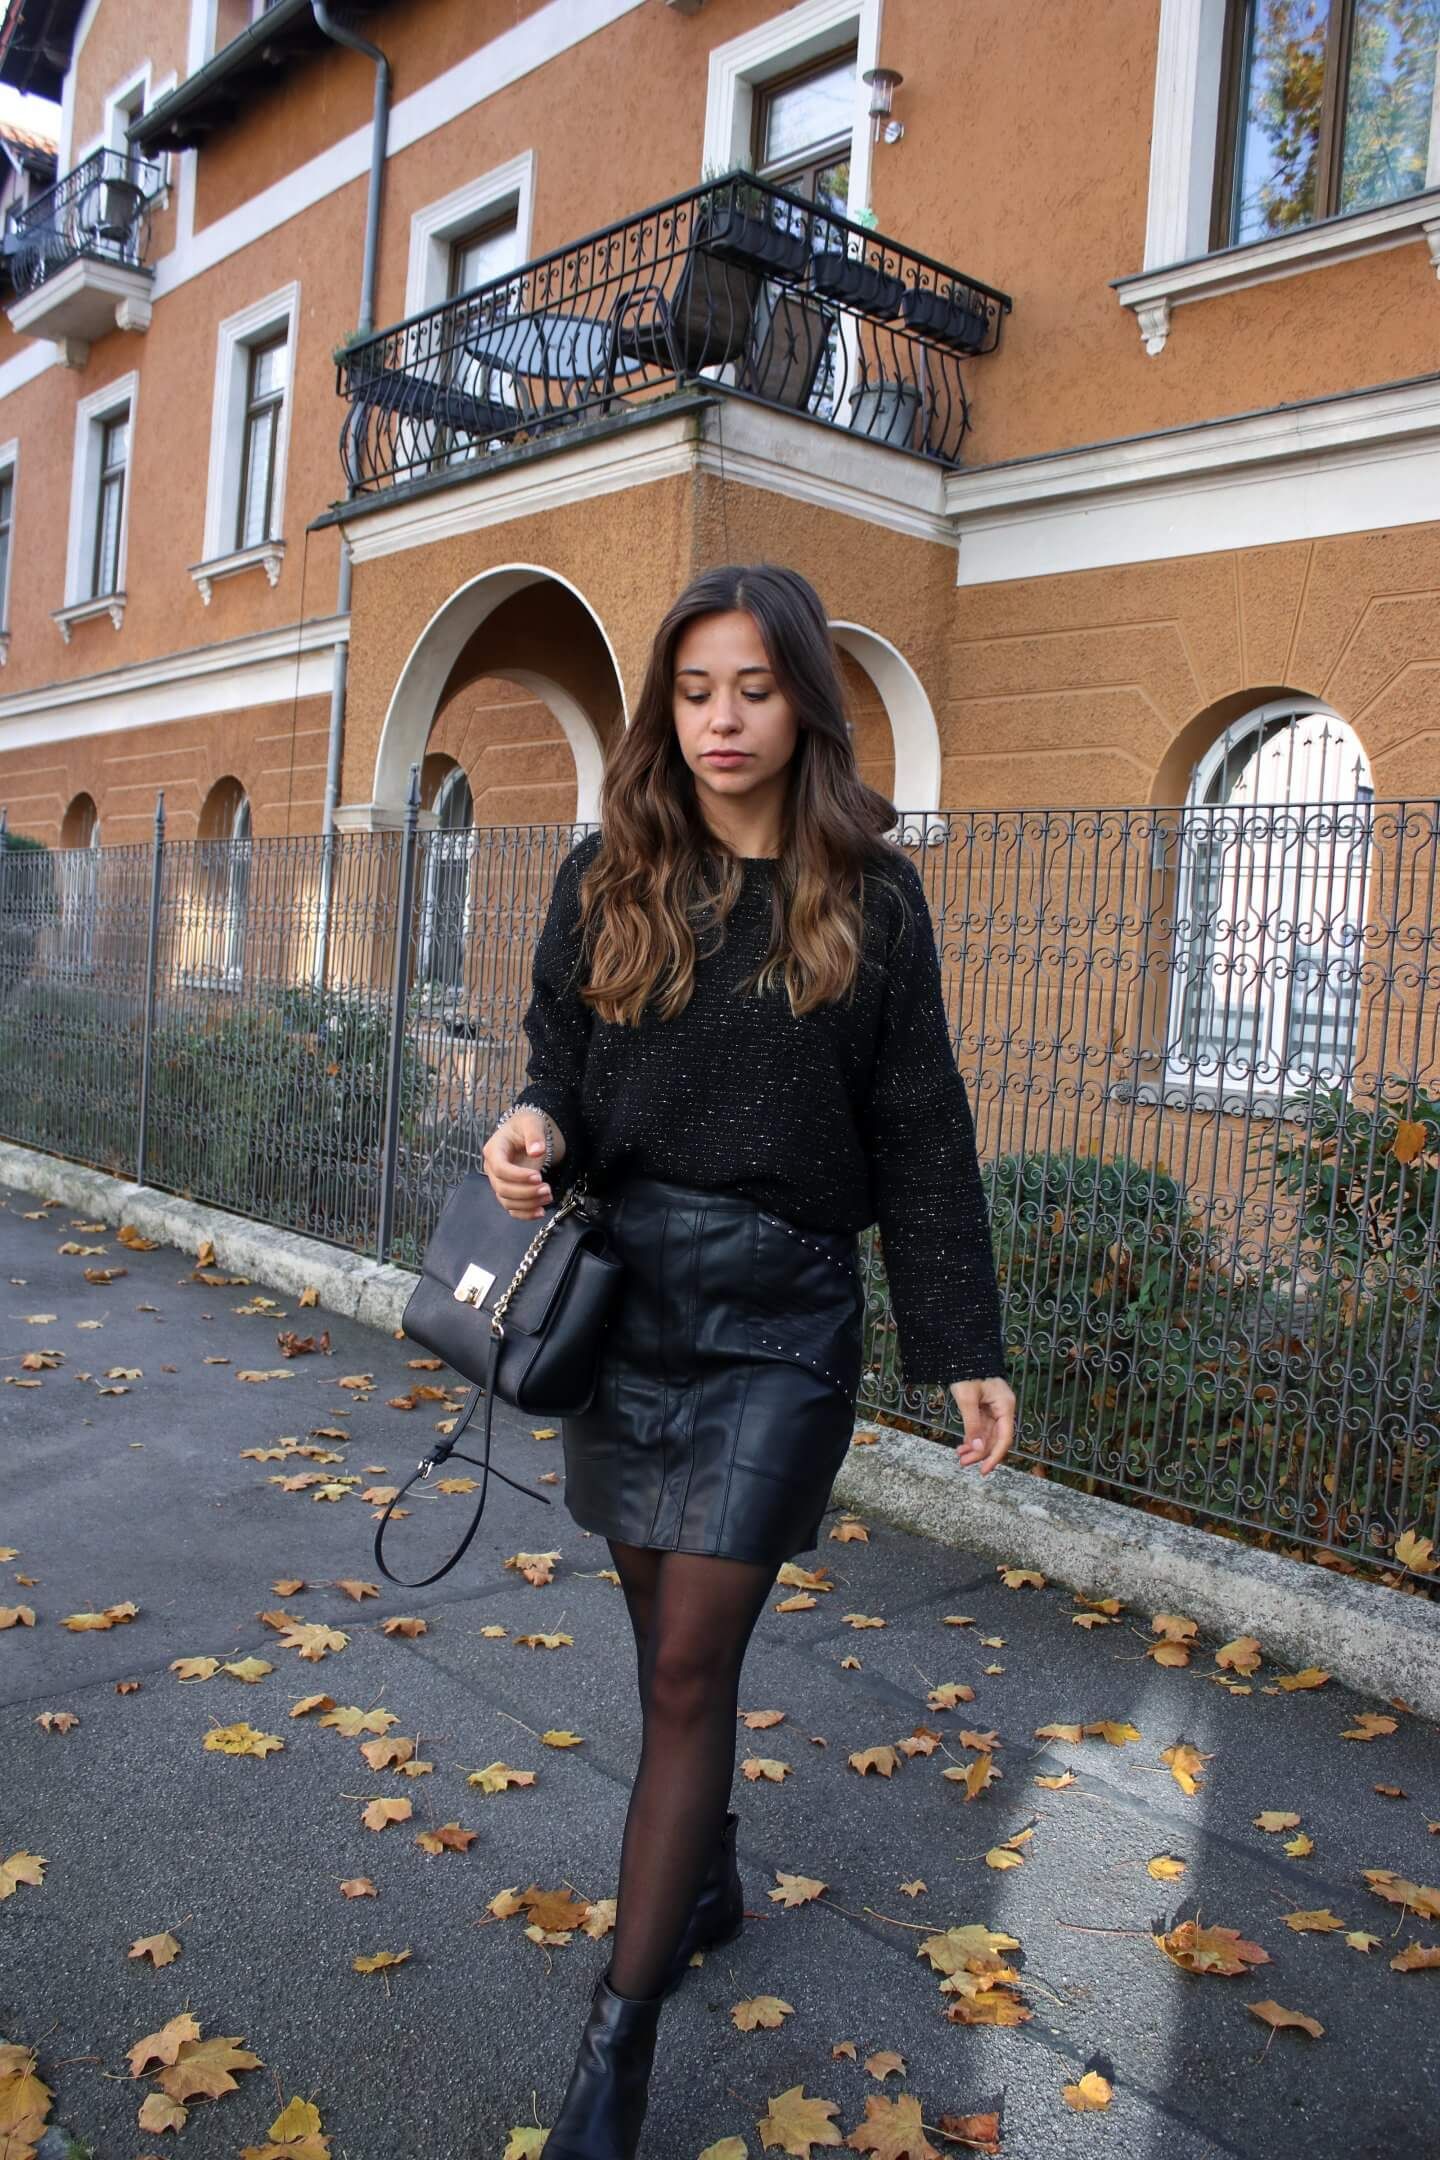 All black look- this is how we style an outfit with only black garments